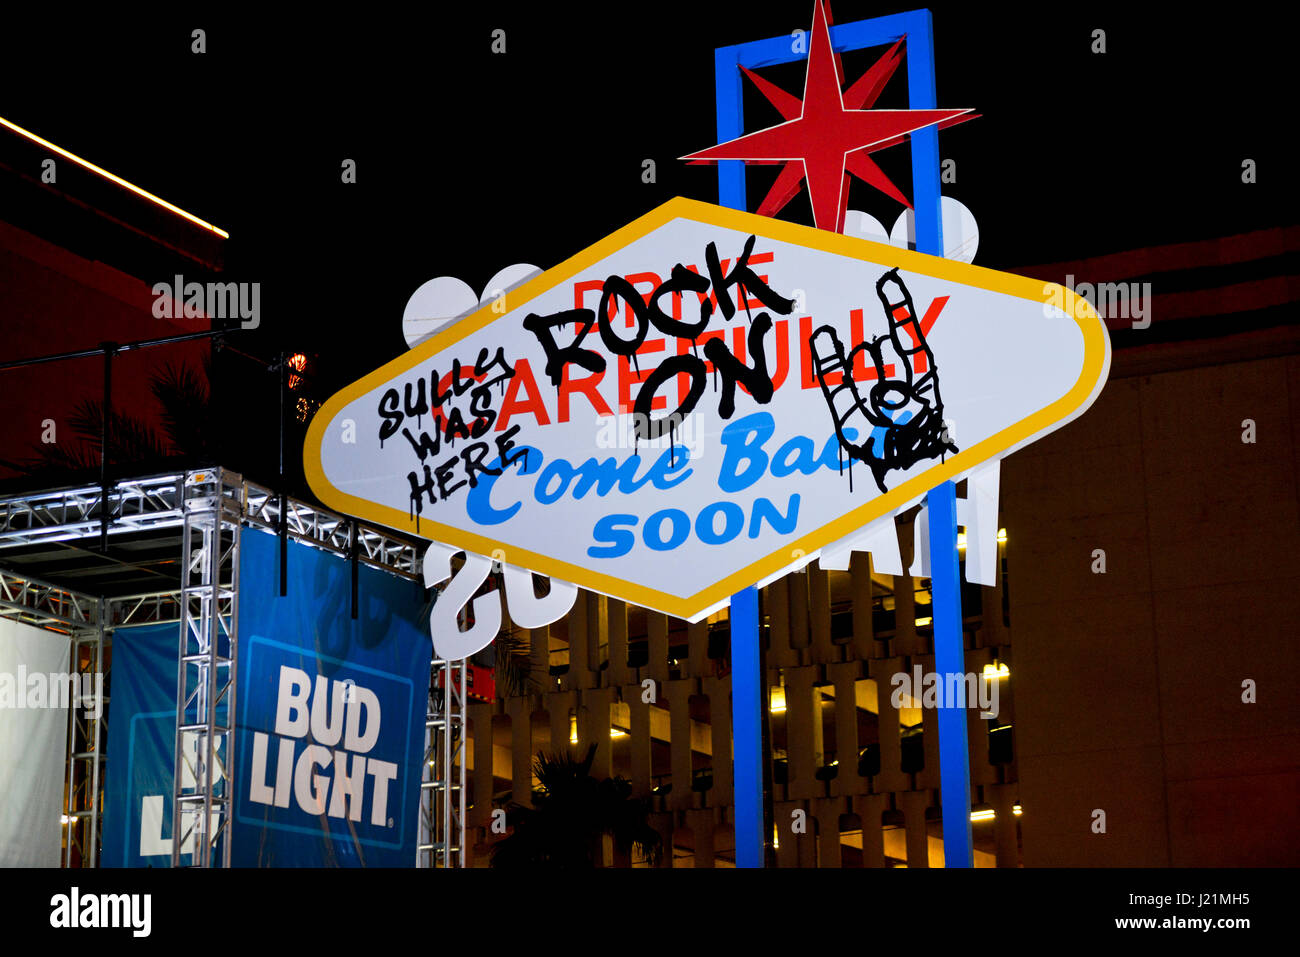 Las Vegas Nevada, April 22, 2017 - Las Vegas 'Rock On' sign on the grounds of the Las Rageous Music Festival in the Downtown Event Center (DLVEC) in Las Vegas, Nevada - photo credit: Ken Howard/Alamy. Stock Photo